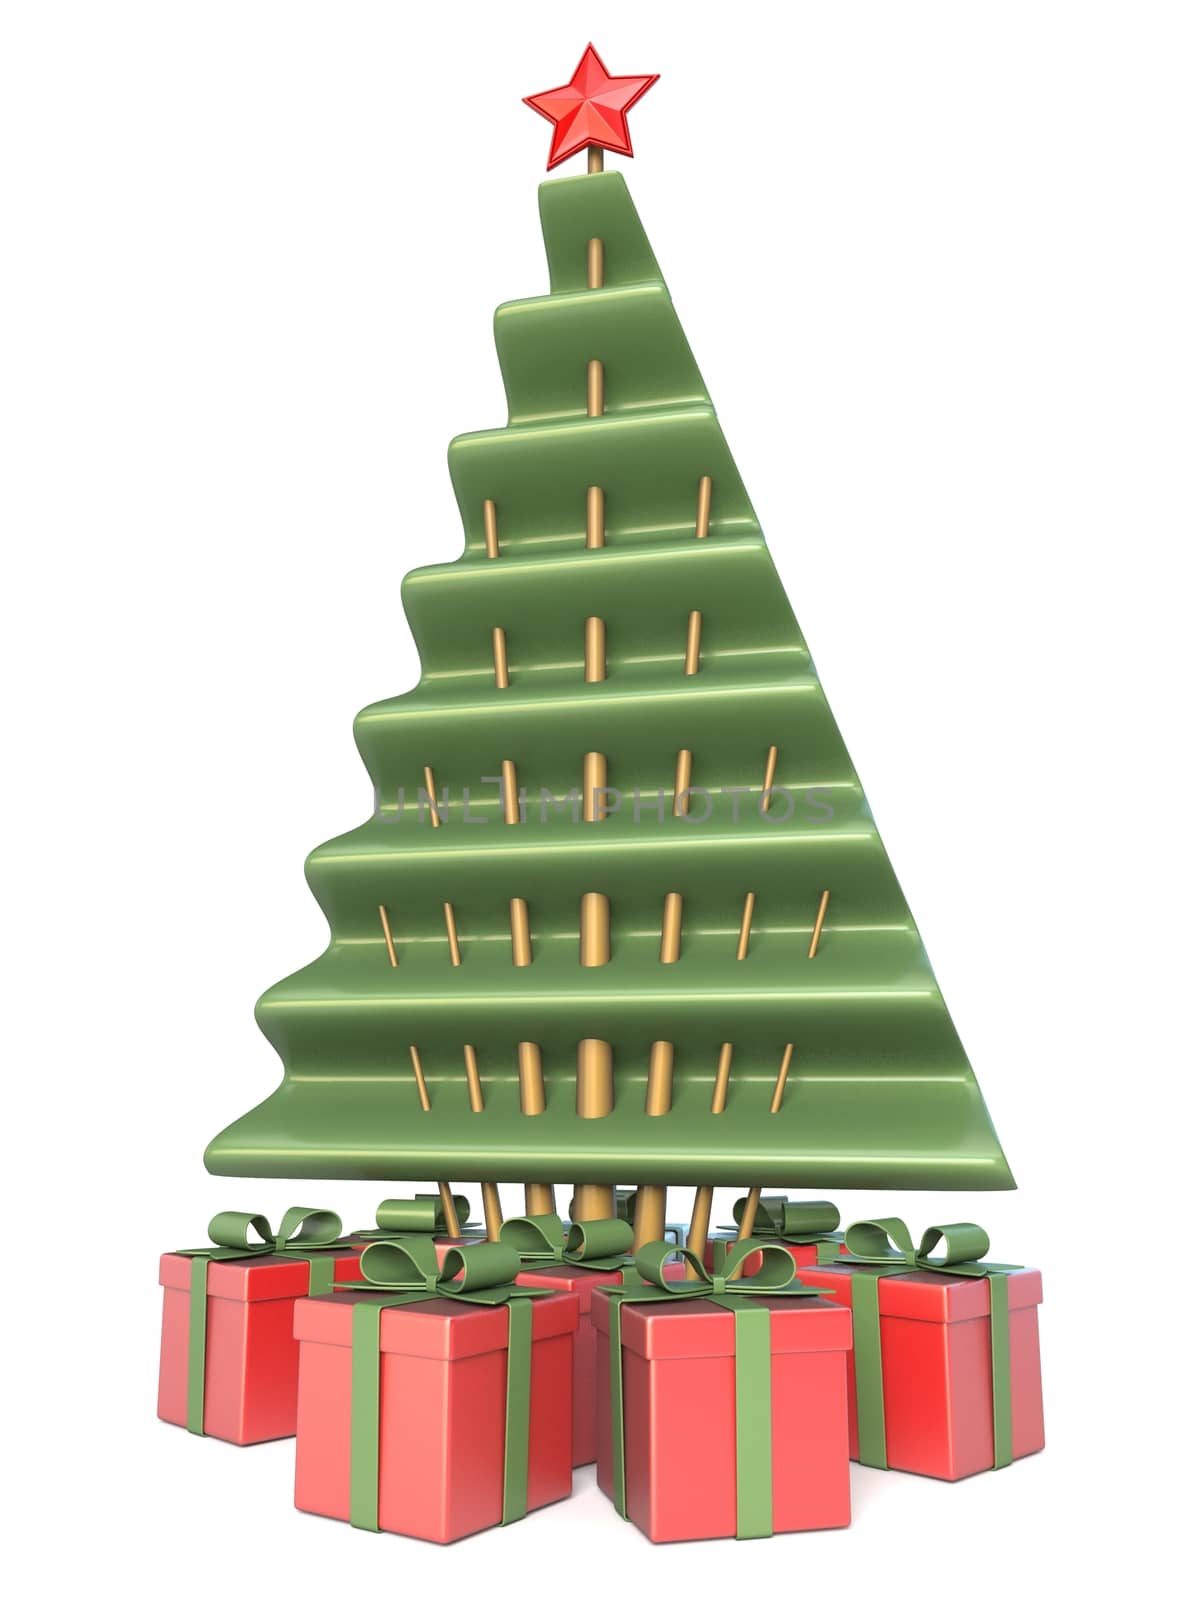 Abstract Christmas tree and gifts under 3D render illustration isolated on white background